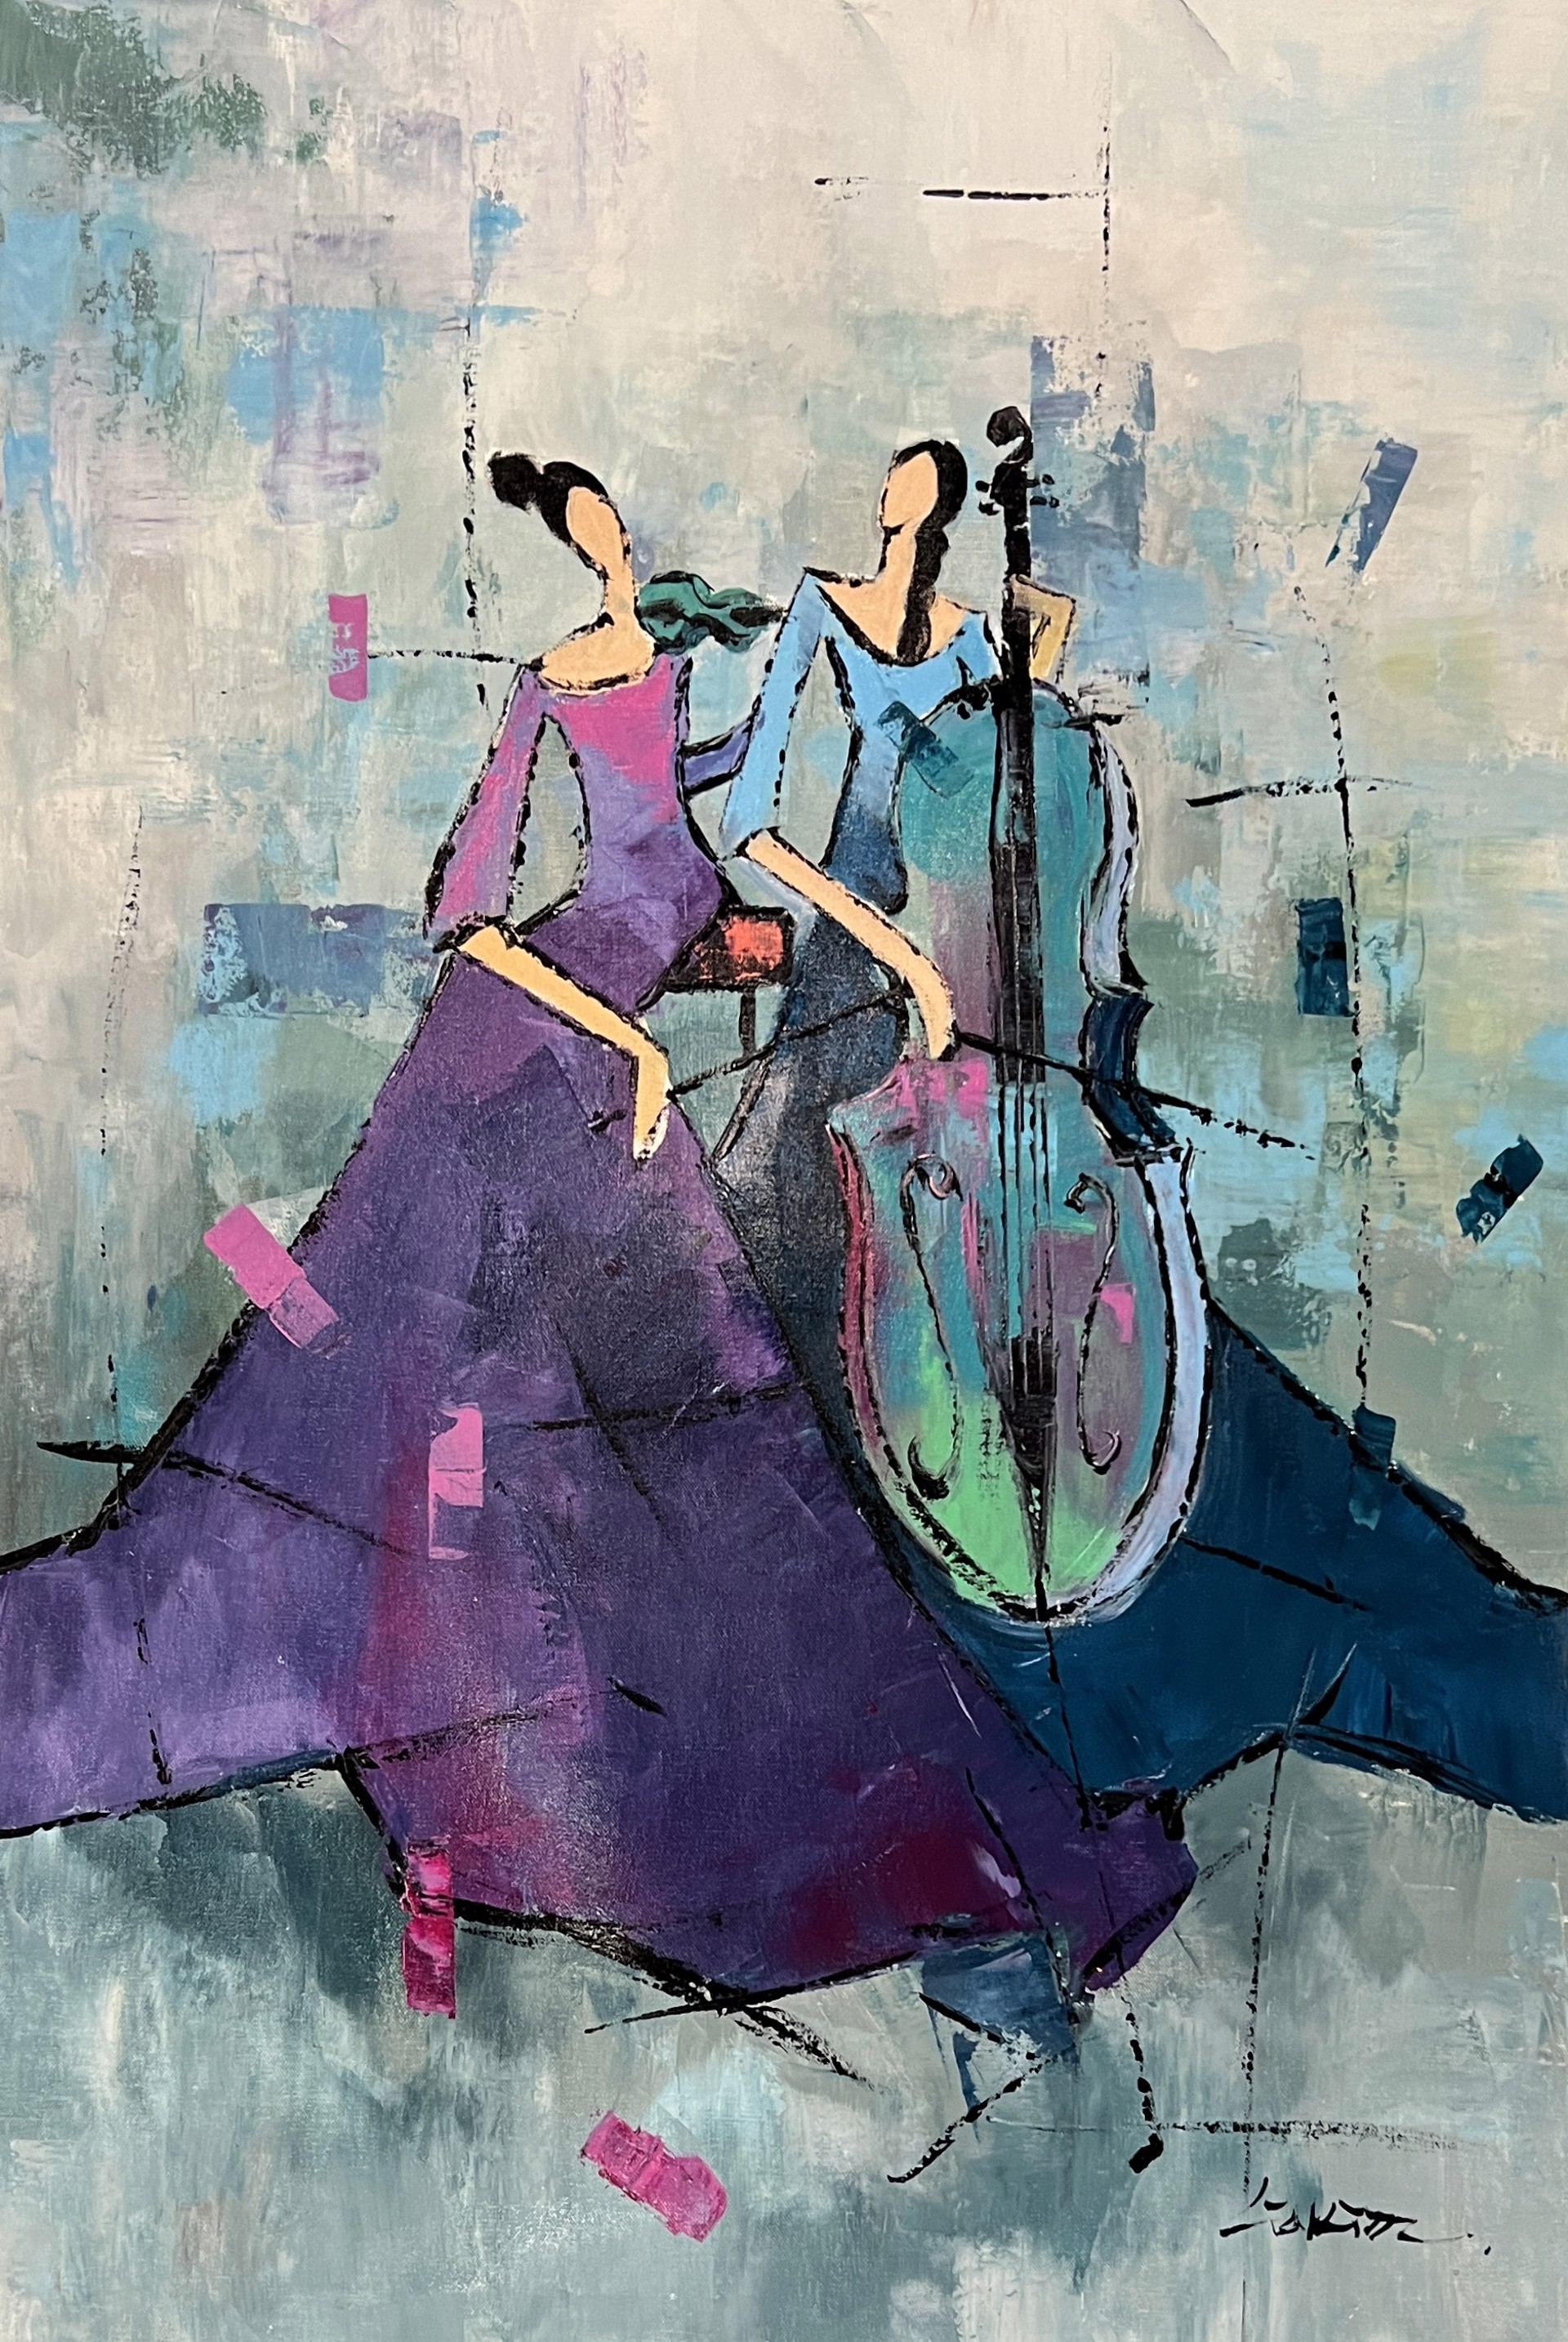 MUSICIANS IN PURPLE AND BLUE by LIA KIM